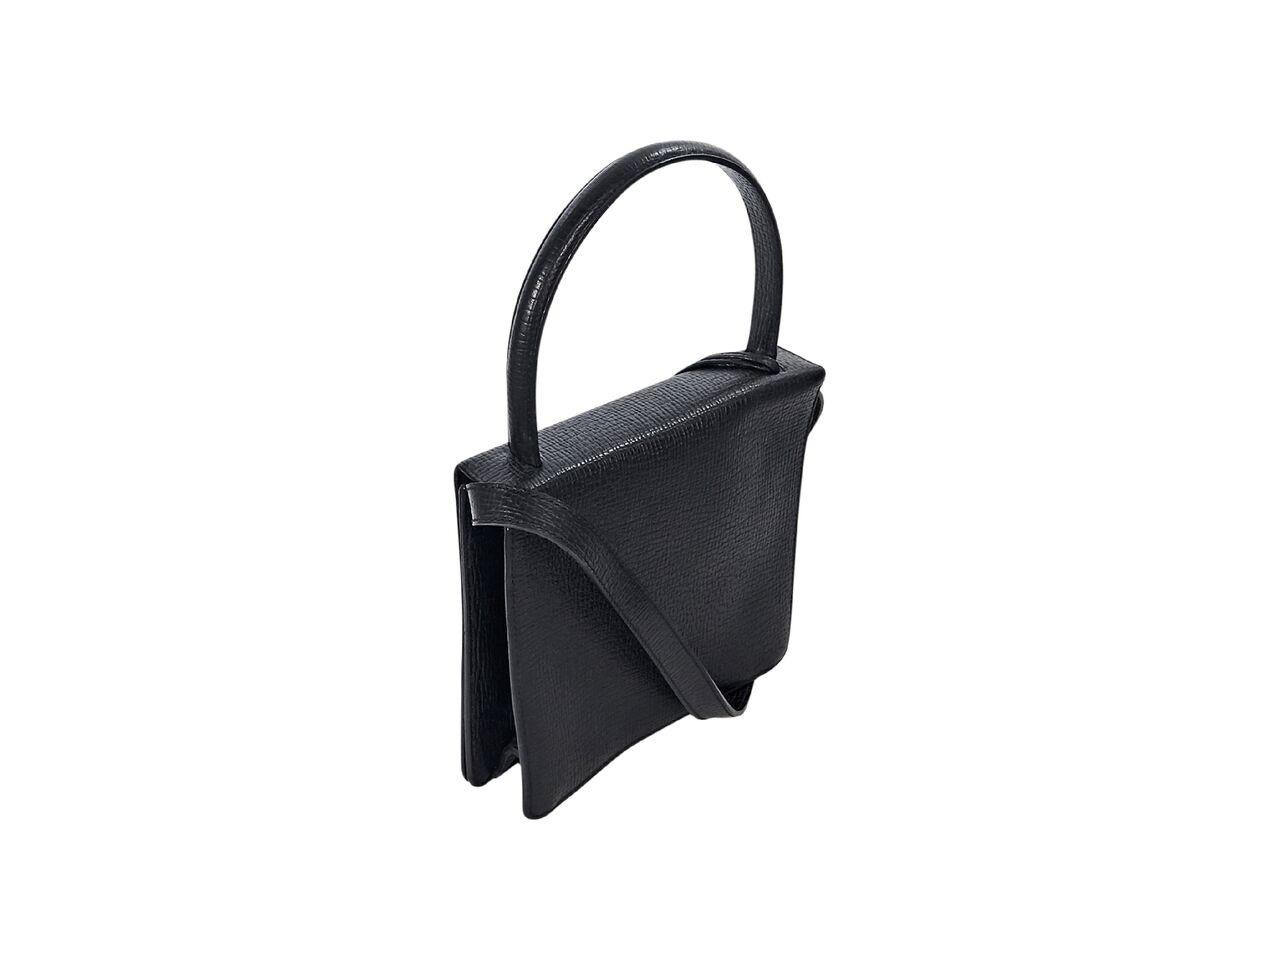 Product details:  Black textured leather crossbody bag by Loewe.  Top carry handle.  Detachable, adjustable crossbody strap.  Front flap with tab closure.  Lined interior with inner zip pocket.  Silvertone hardware.  8.75